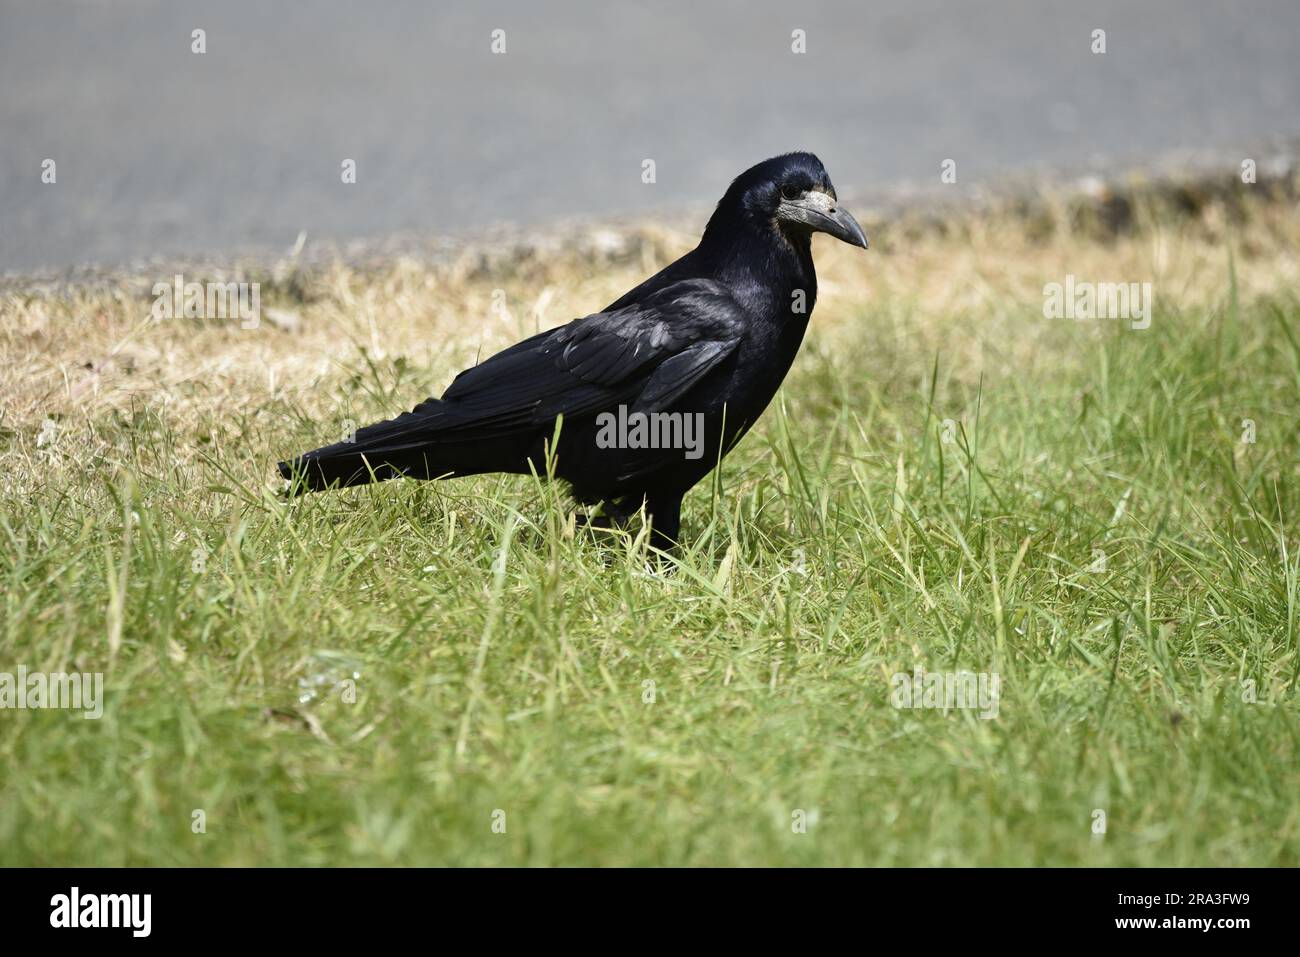 Eye Level Image of a Rook (Corvus frugilegus) Standing on Grass in Right-Profile, taken on the Isle of Man, UK in Summer Stock Photo